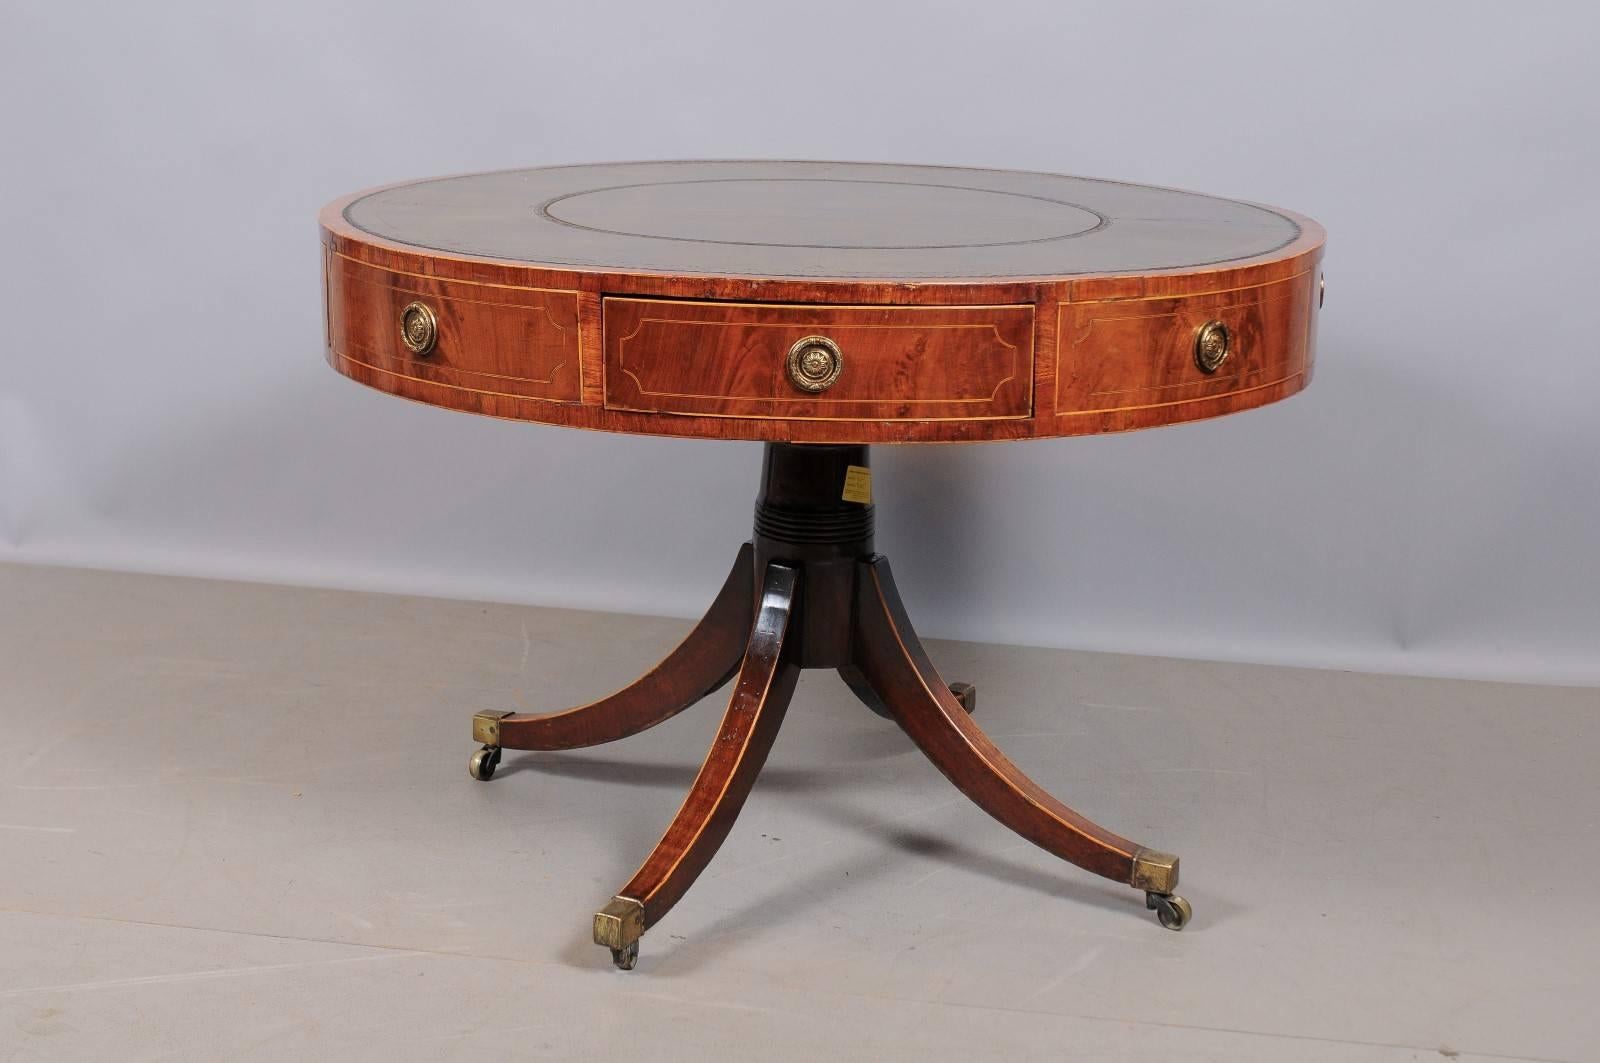 Early 19th century George III revolving mahogany drum table with inset green leather top, kings-wood cross-banding, string inlay, four working drawers, column base with four splayed legs on brass castors. 

William Word Fine Antiques, Atlanta's